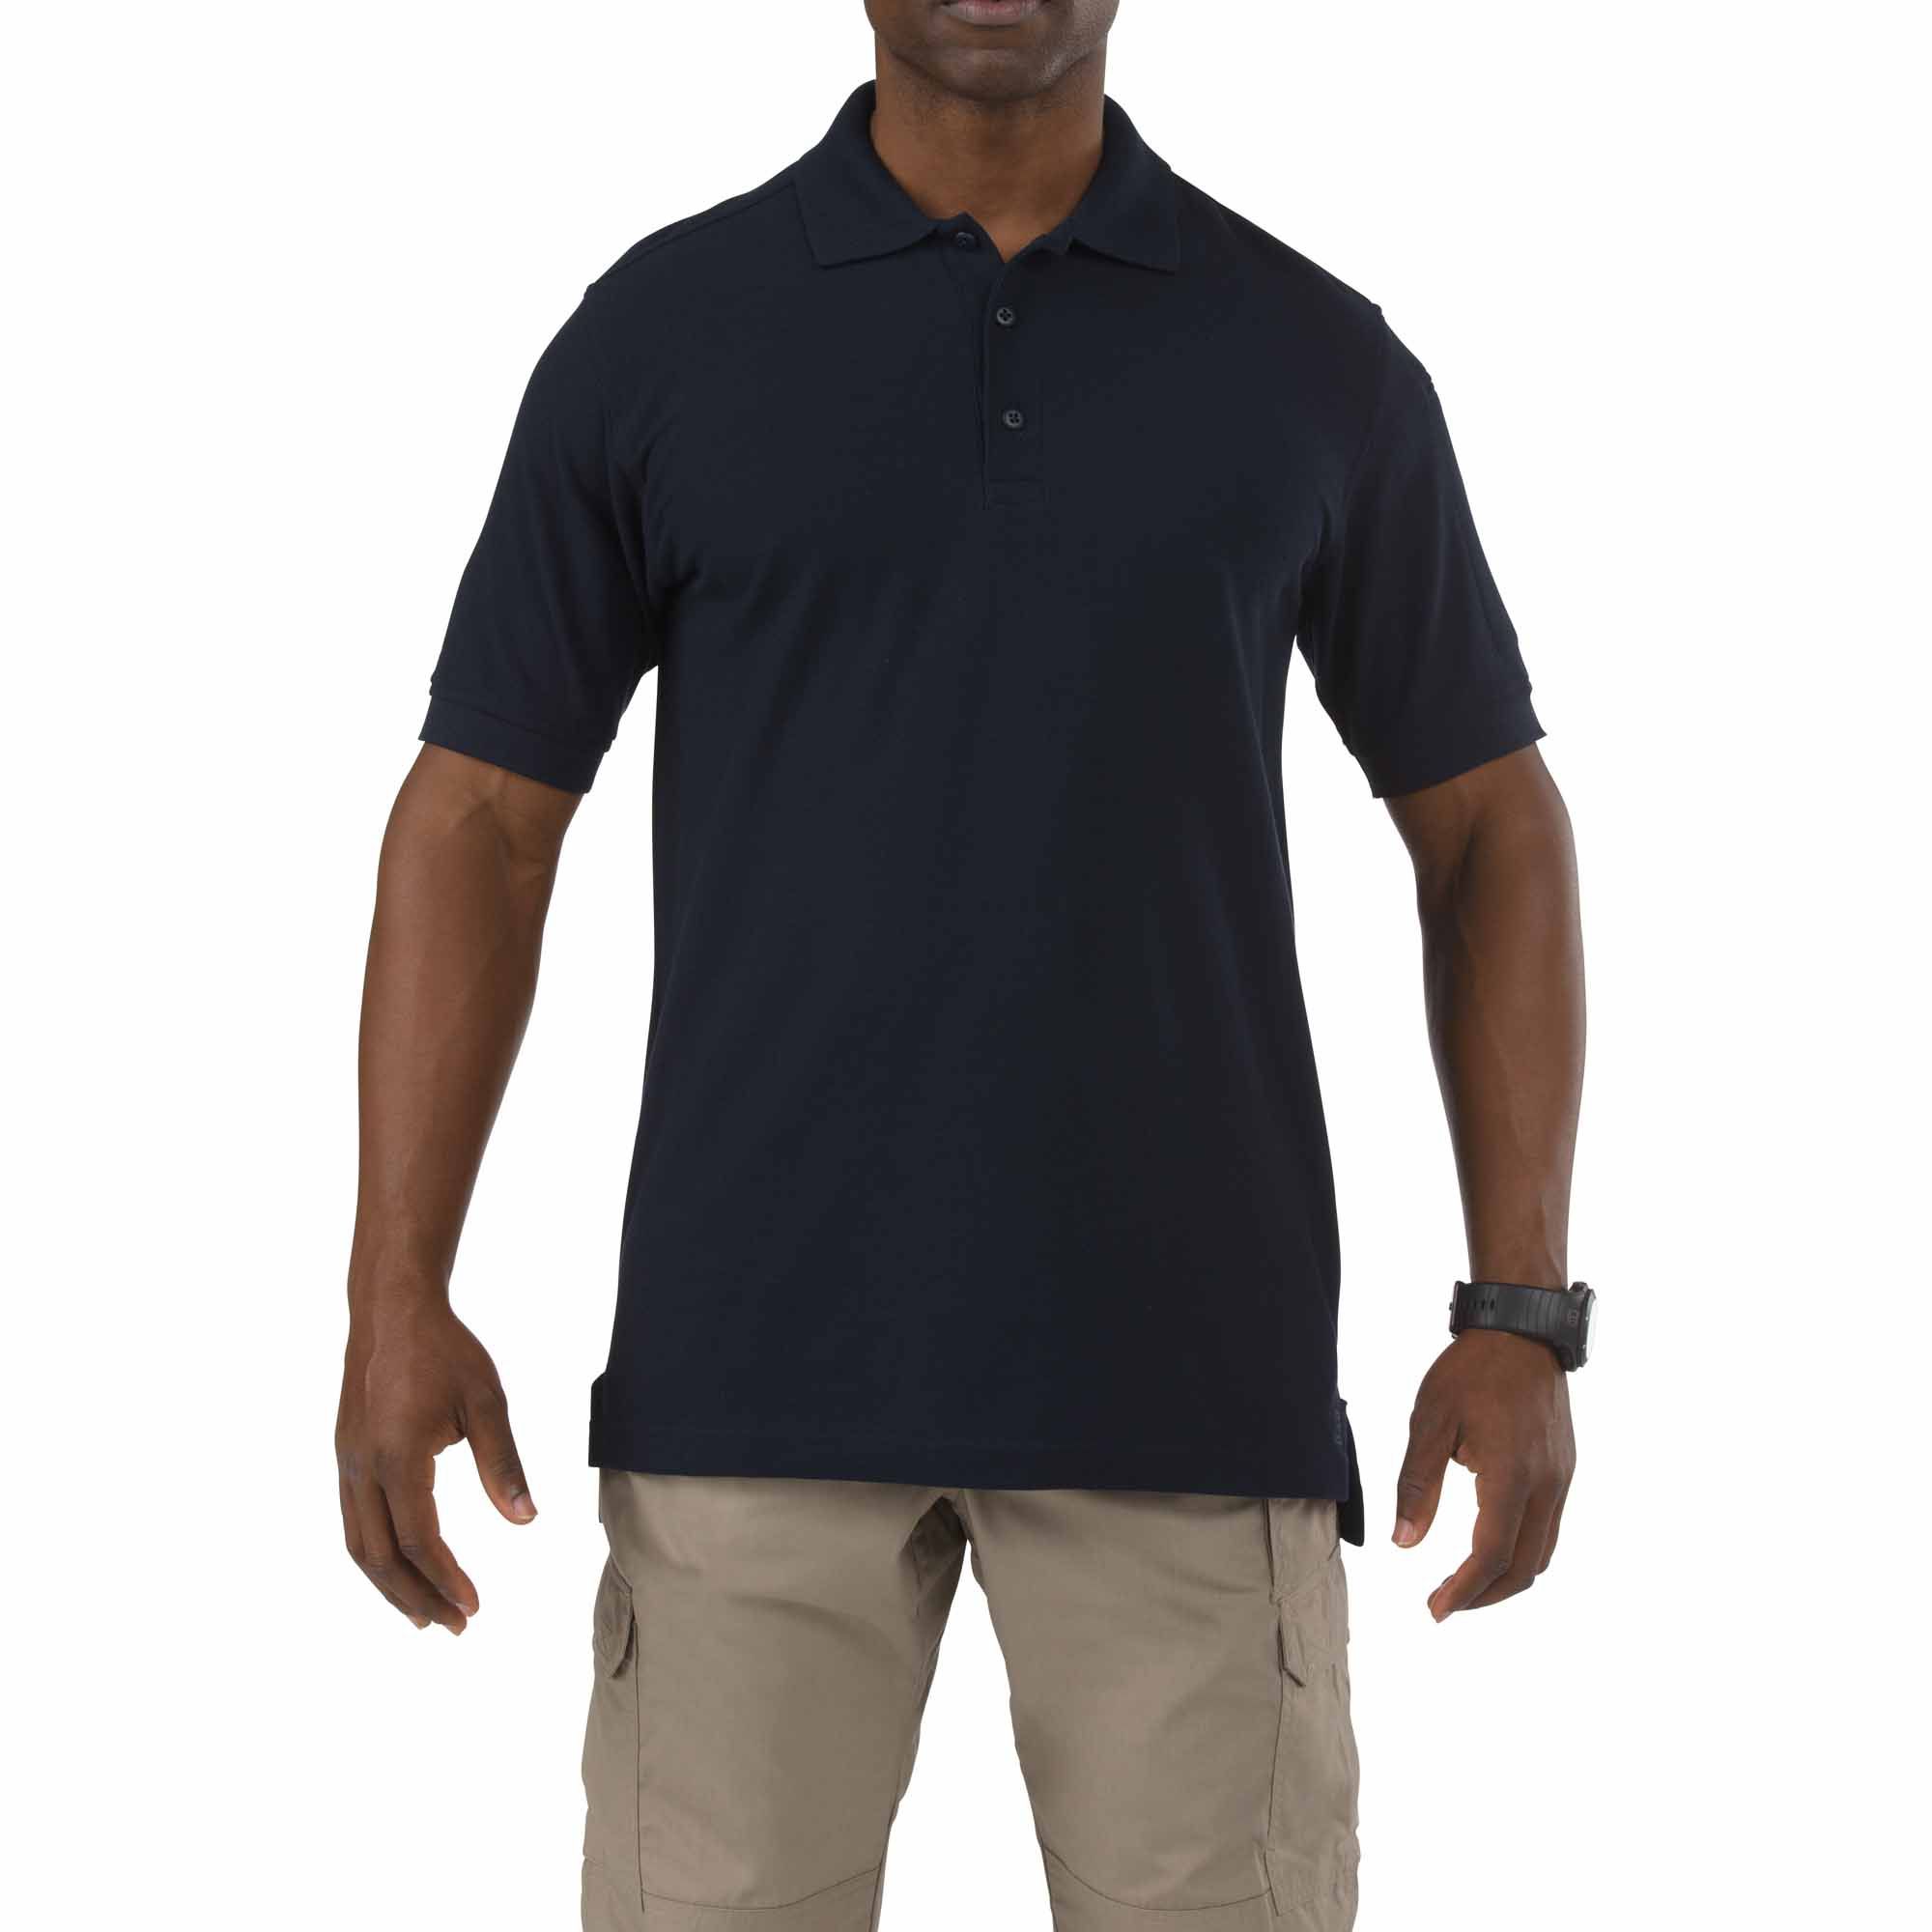 5.11 Tactical Short Sleeve Utility Polo Dark Navy 41180 5.11 Tactical size M